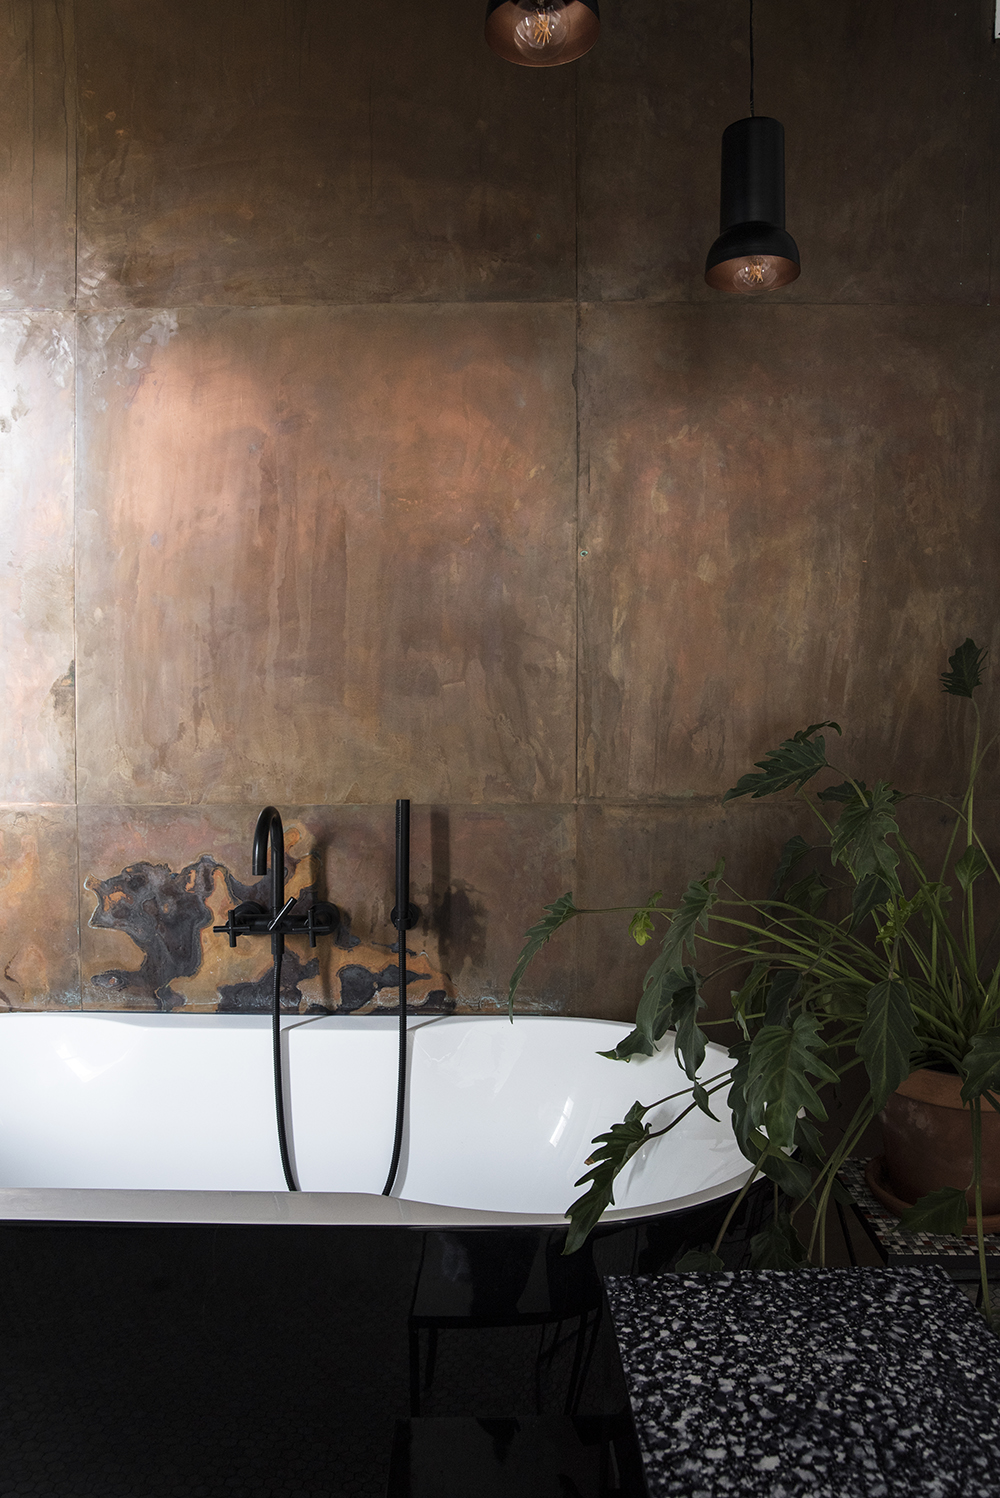 Black and white Bathroom with copper wall // Plants// Black dornbracht tara faucets